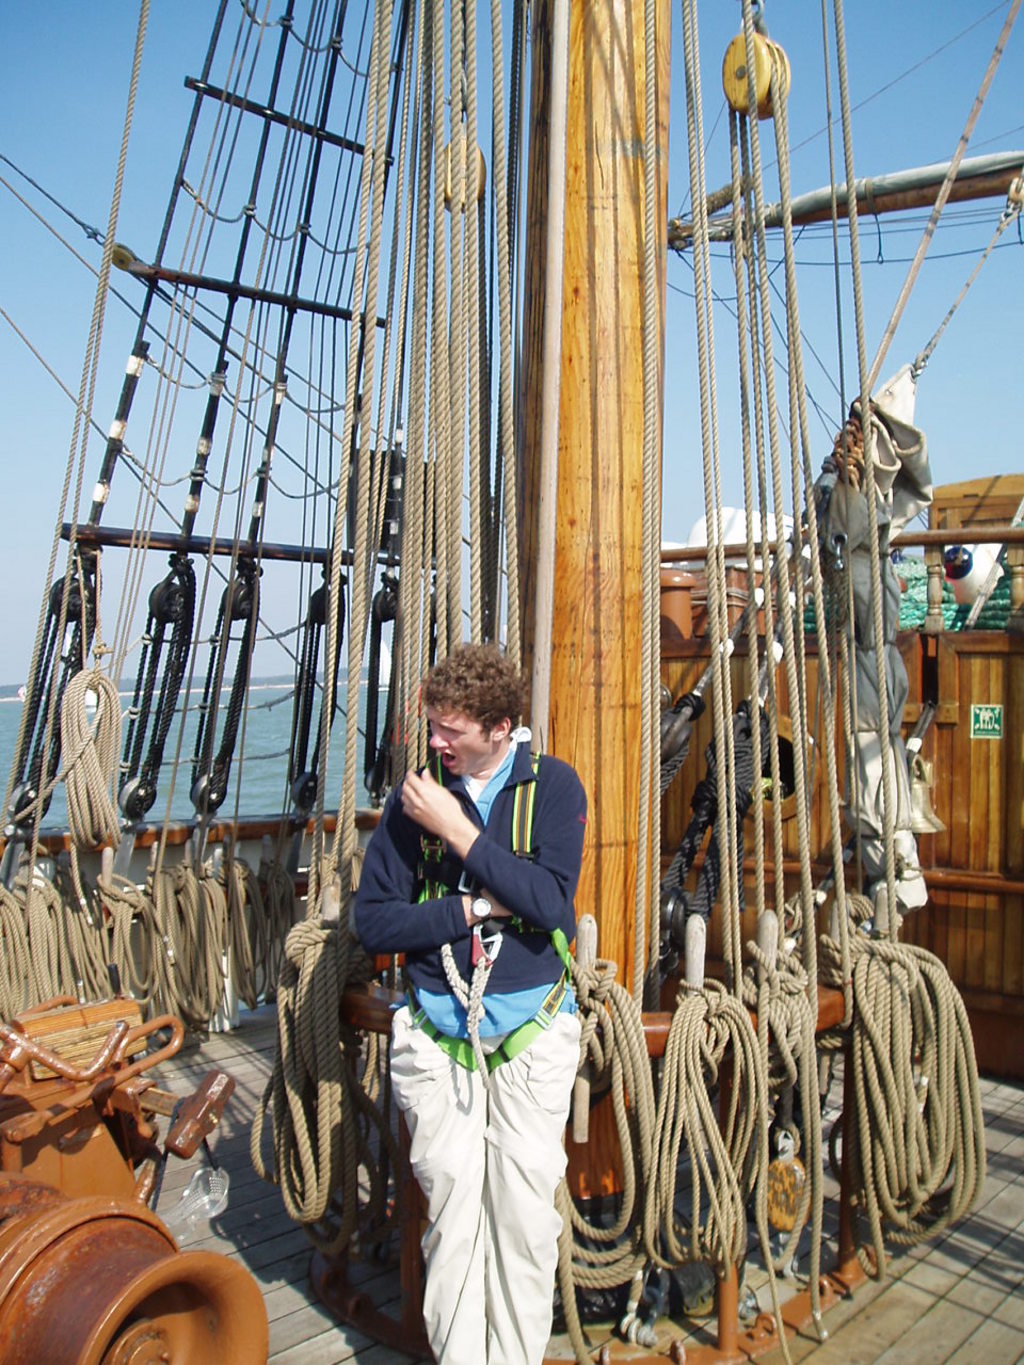 John by the fore mast.